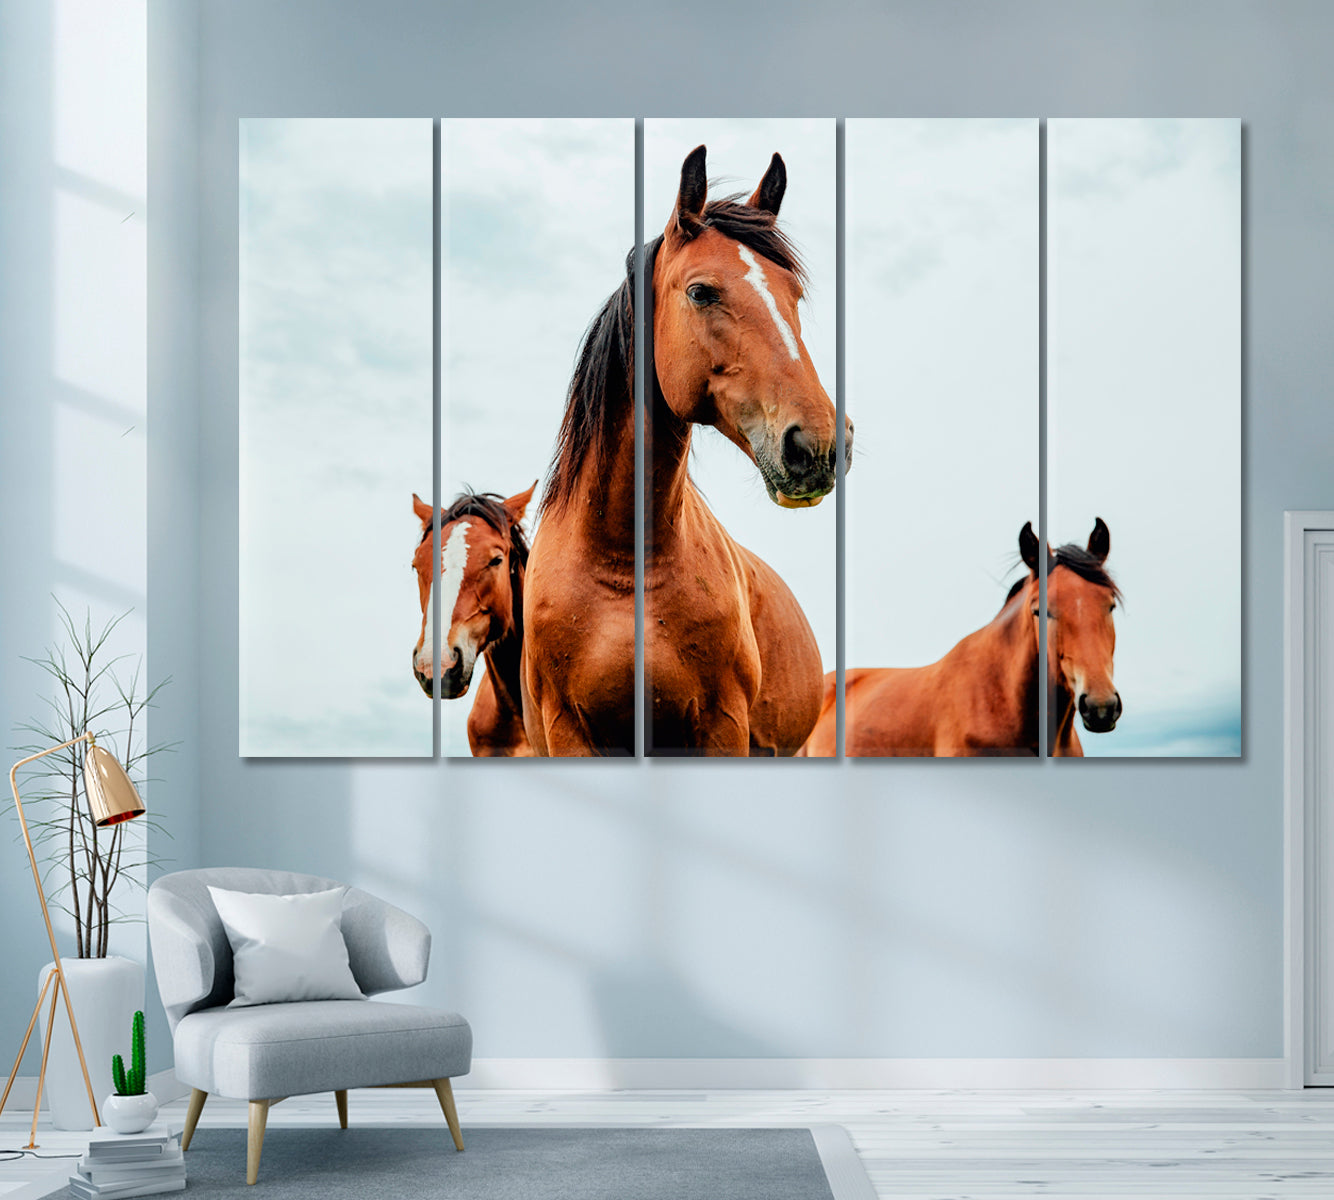 Free Horses Canvas Print ArtLexy 5 Panels 36"x24" inches 